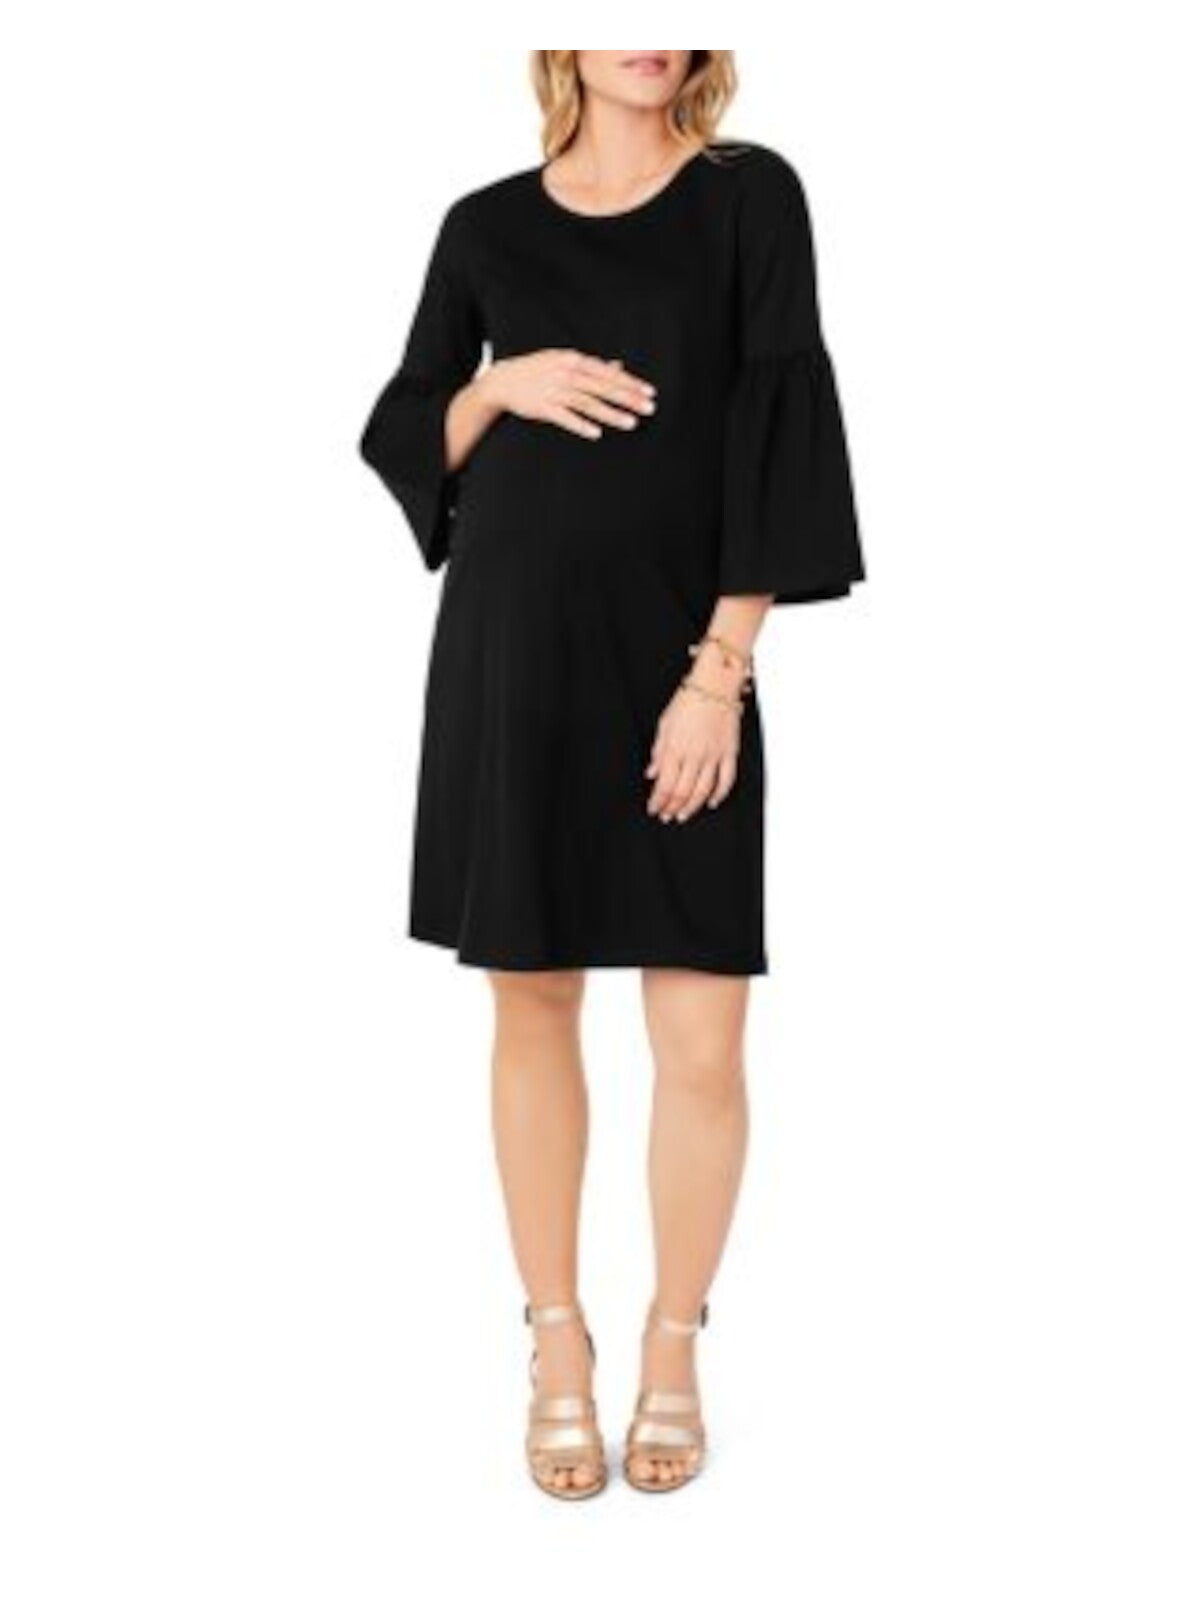 INGRID & ISABEL Womens Black Knit Darted Bell Sleeve Jewel Neck Above The Knee Shift Dress Maternity XL